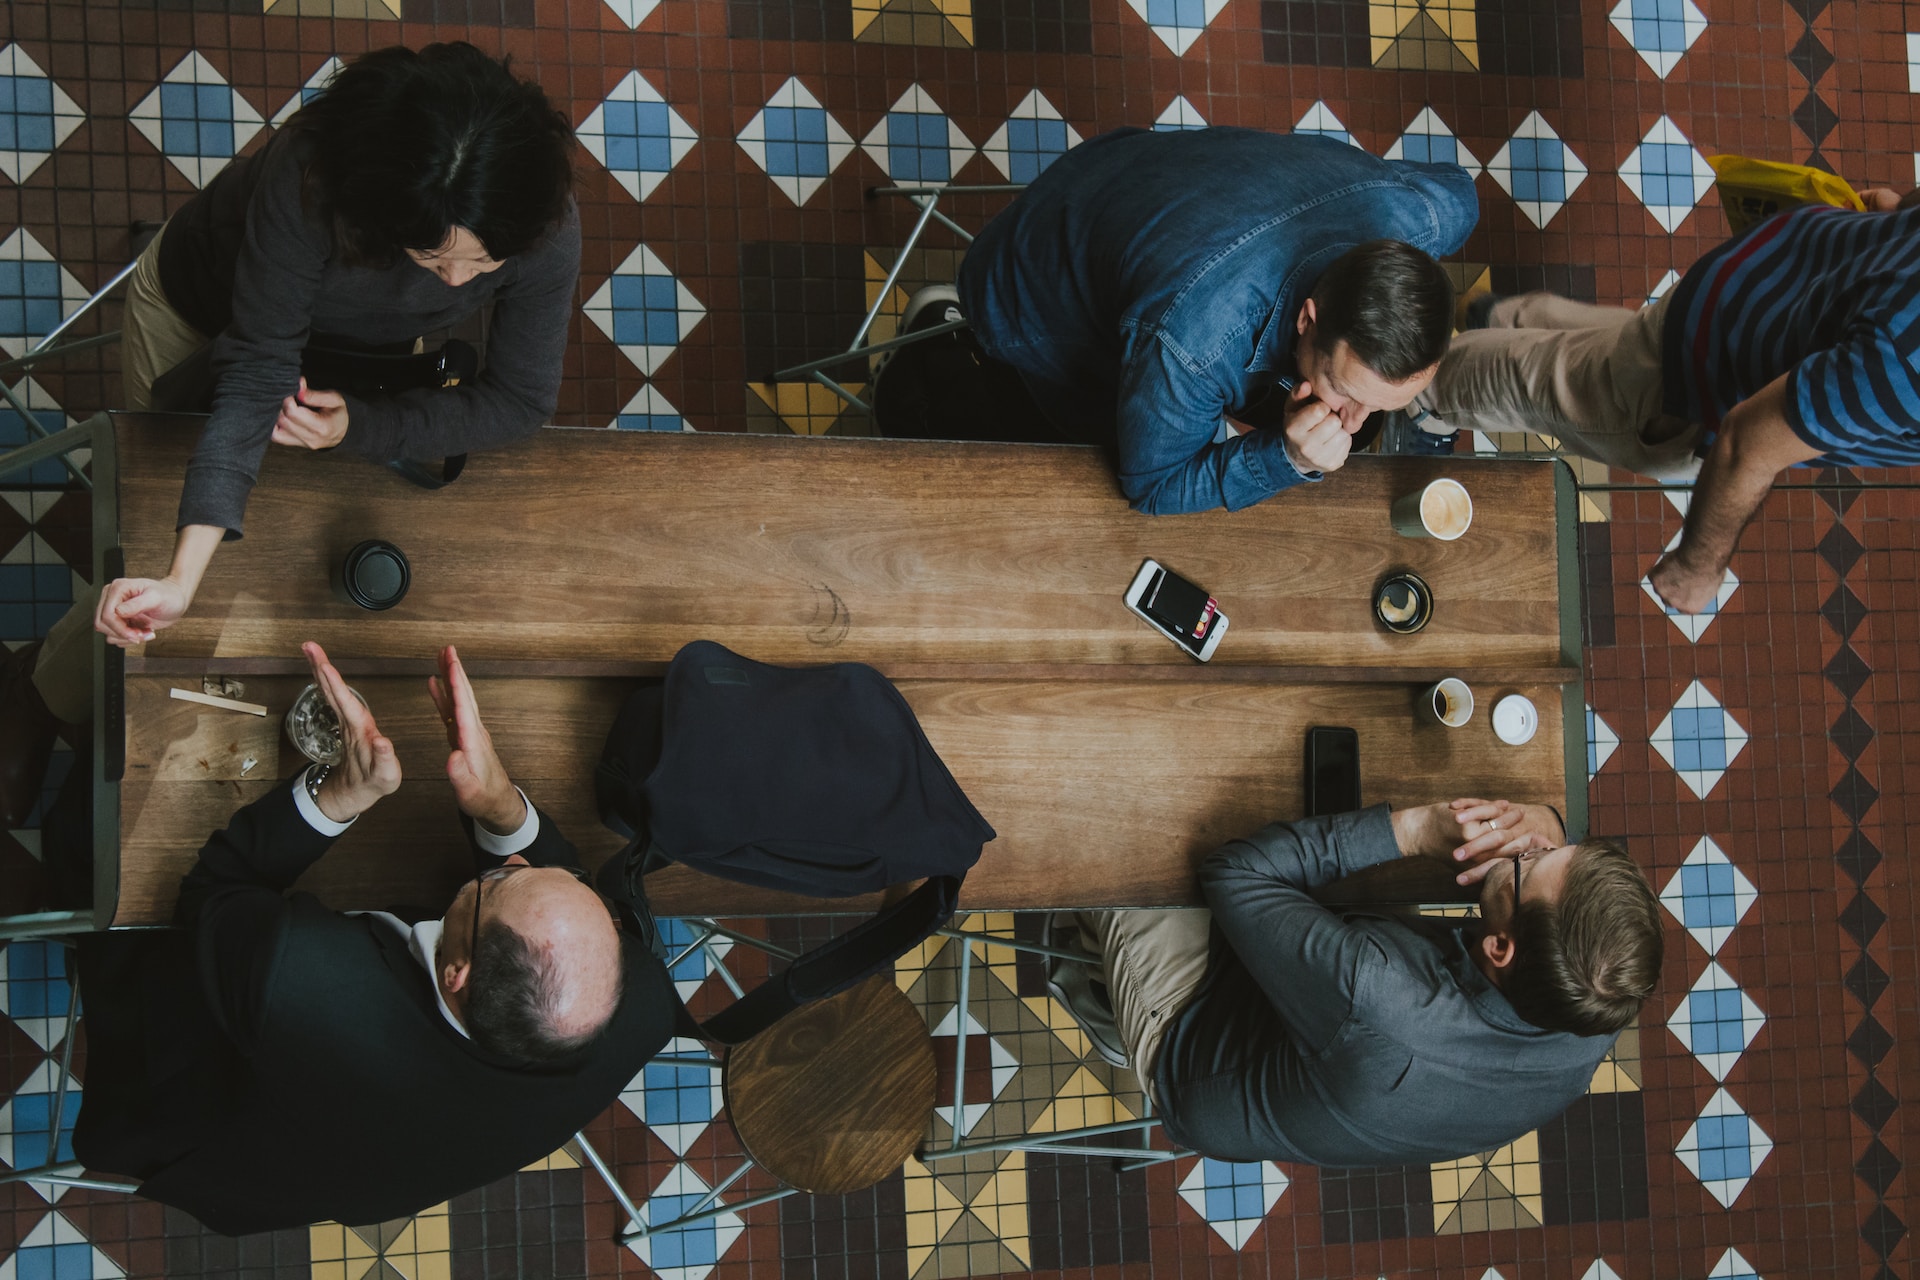 Arial view of a group of people sitting and chatting at a table with coffees